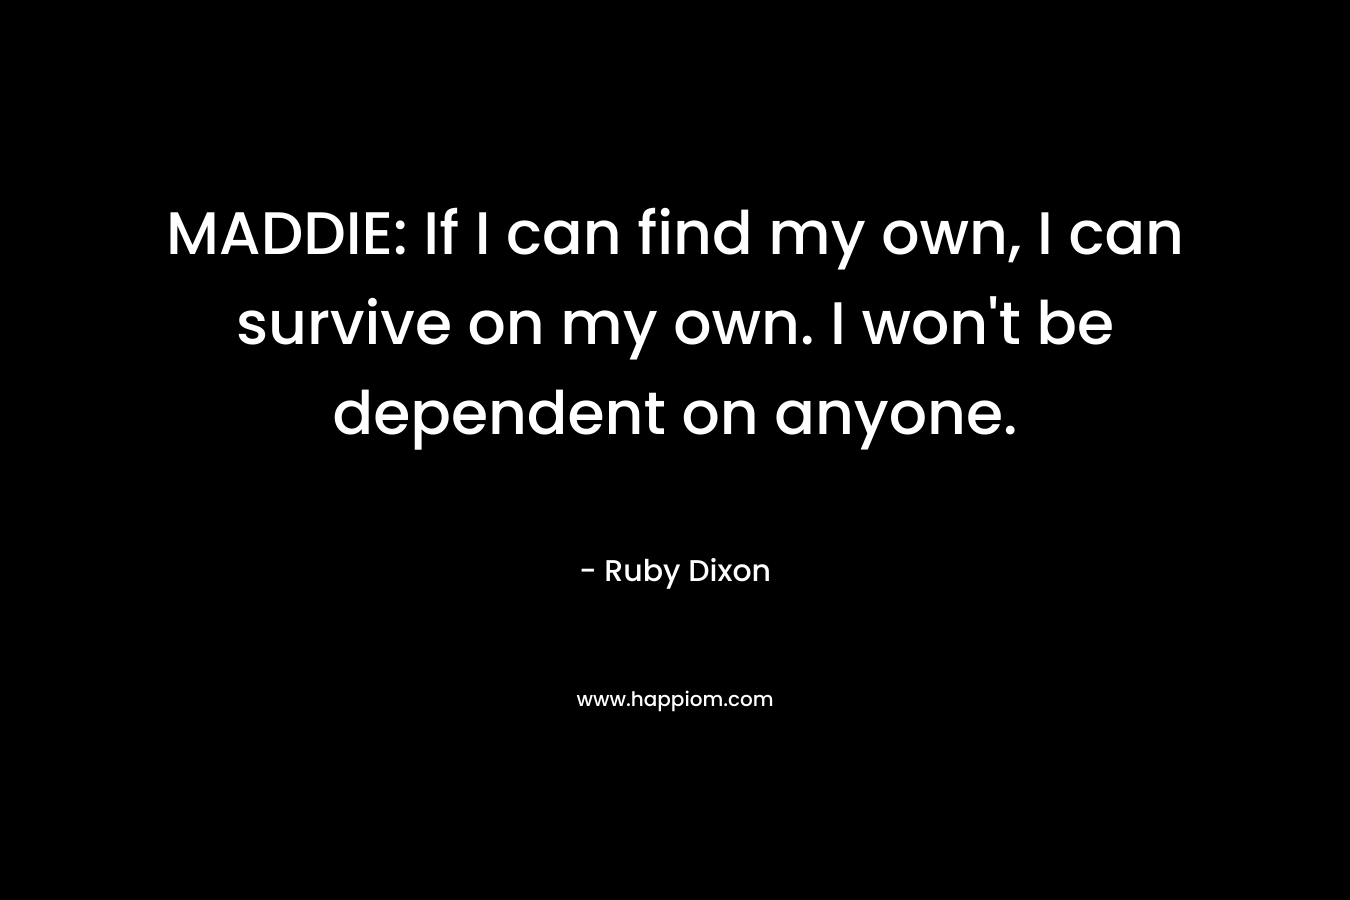 MADDIE: If I can find my own, I can survive on my own. I won’t be dependent on anyone. – Ruby Dixon